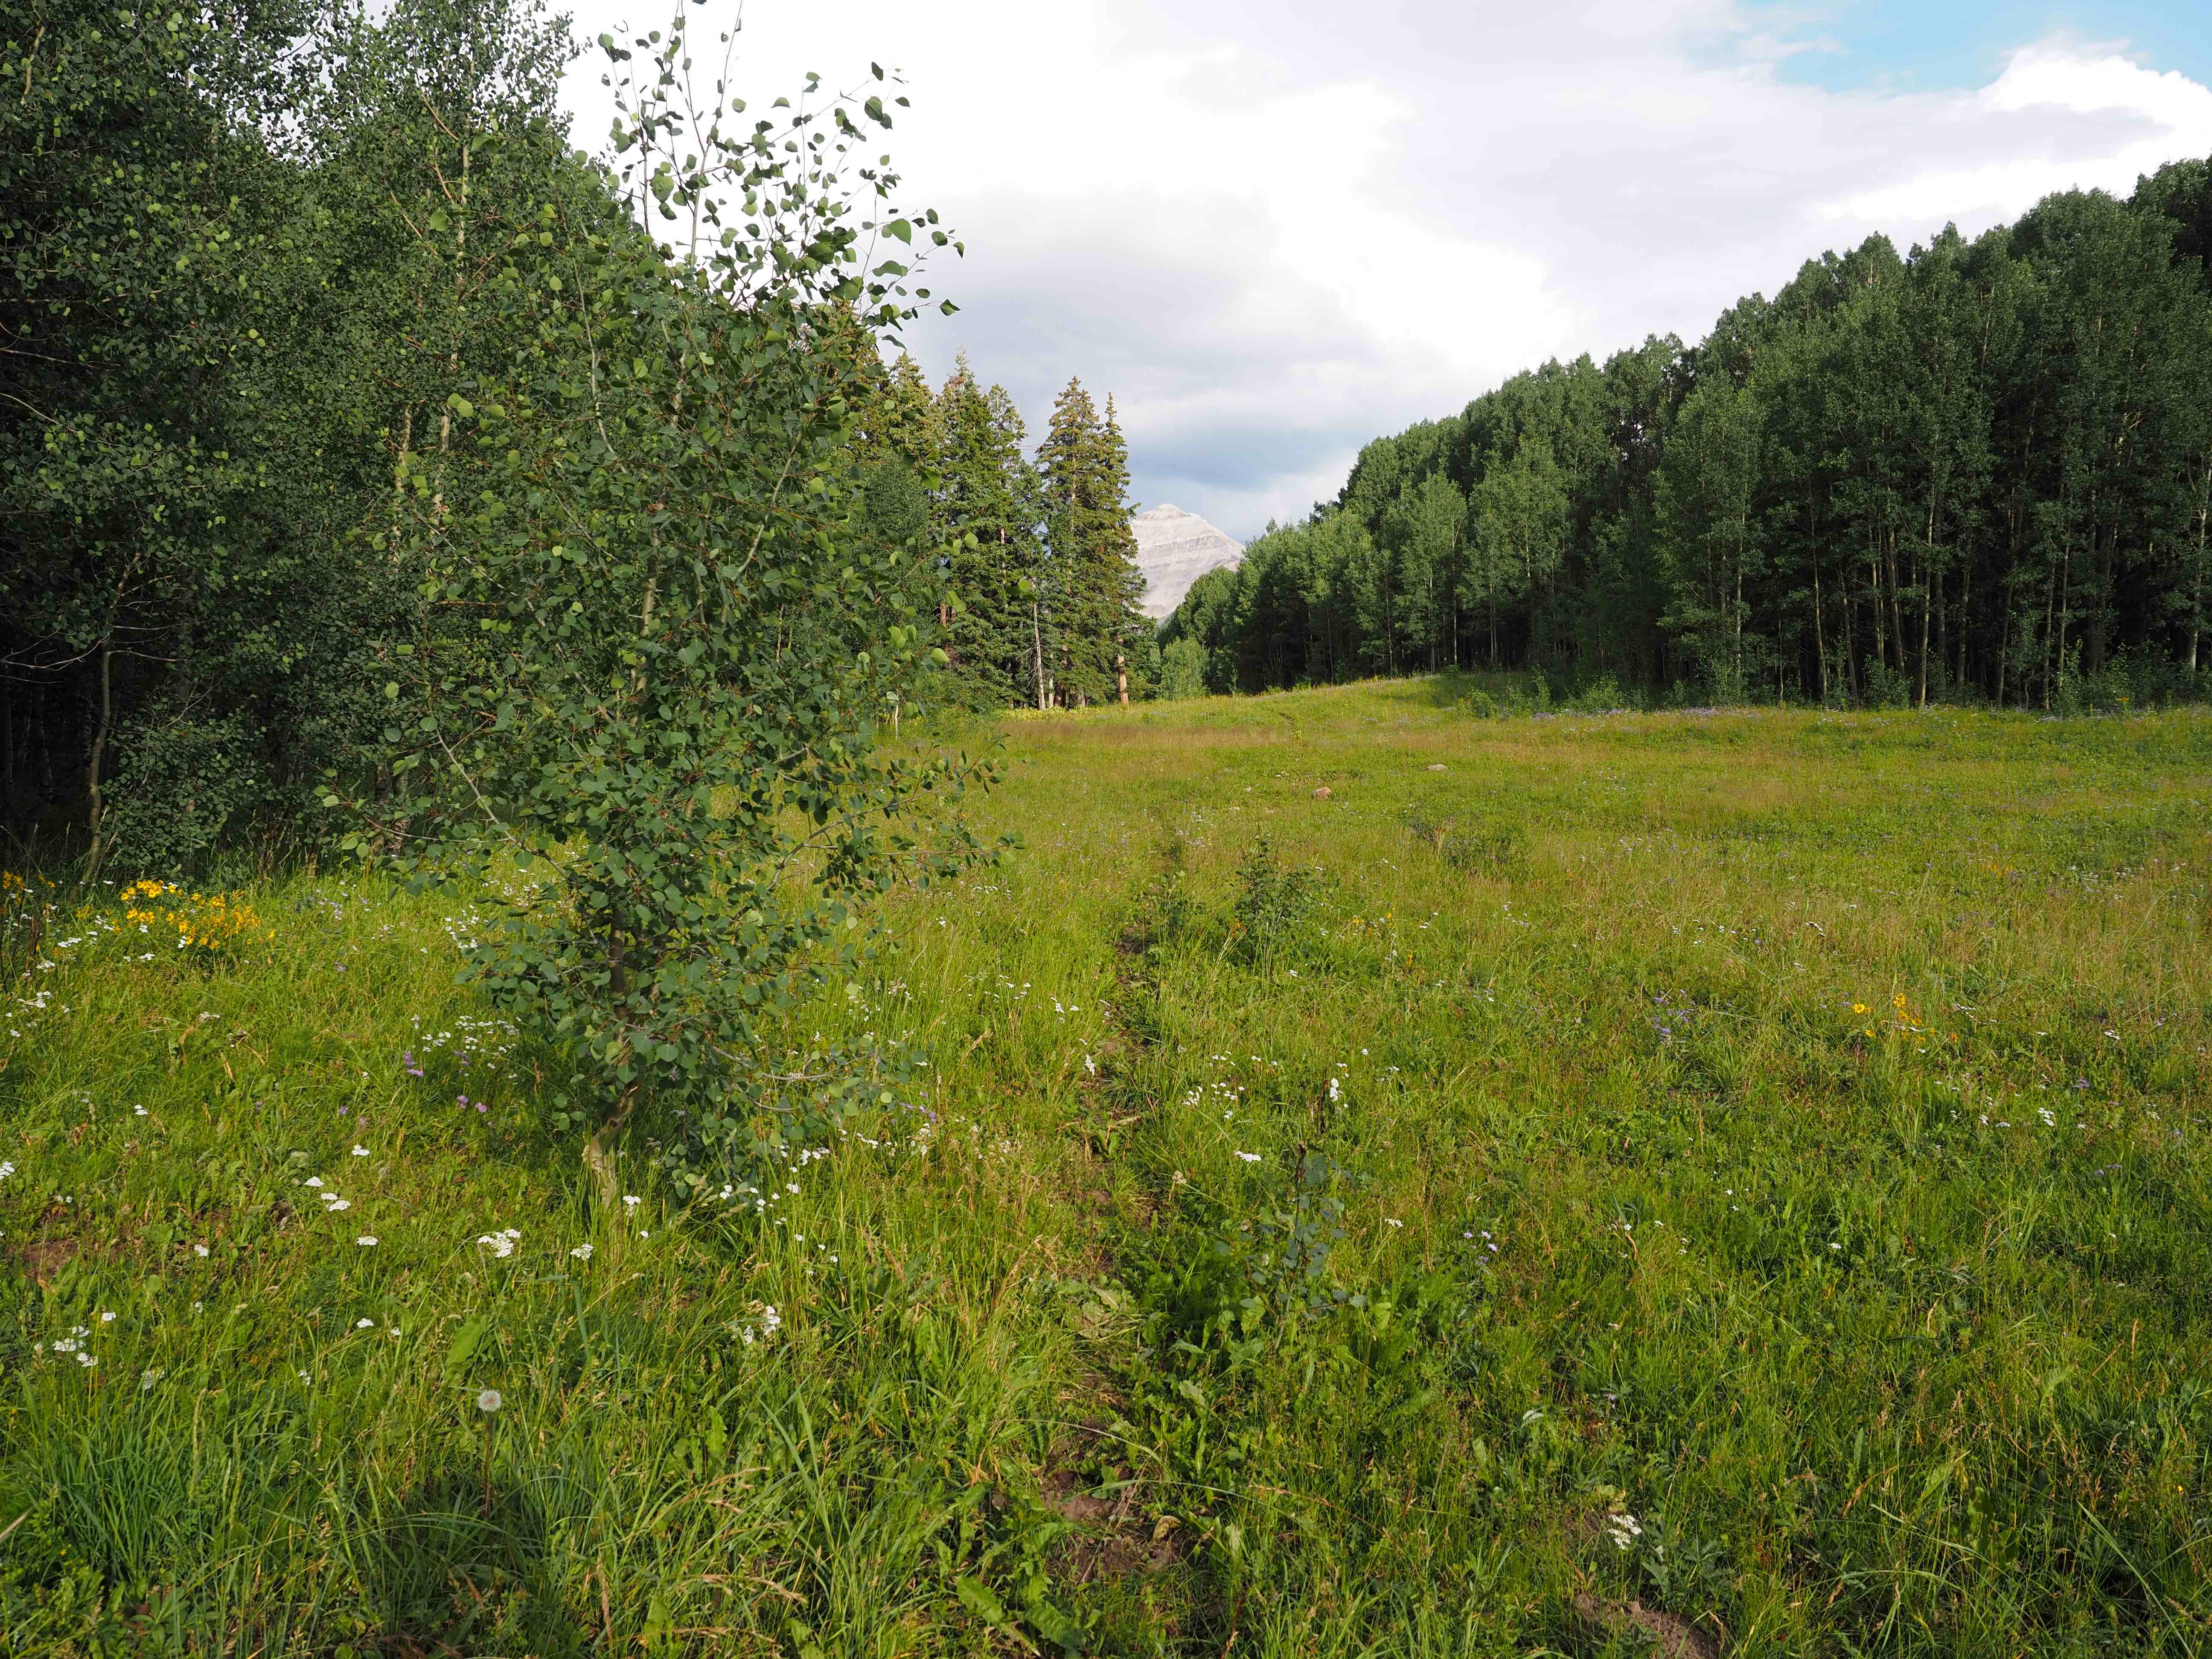 A beautiful meadow at high elevation